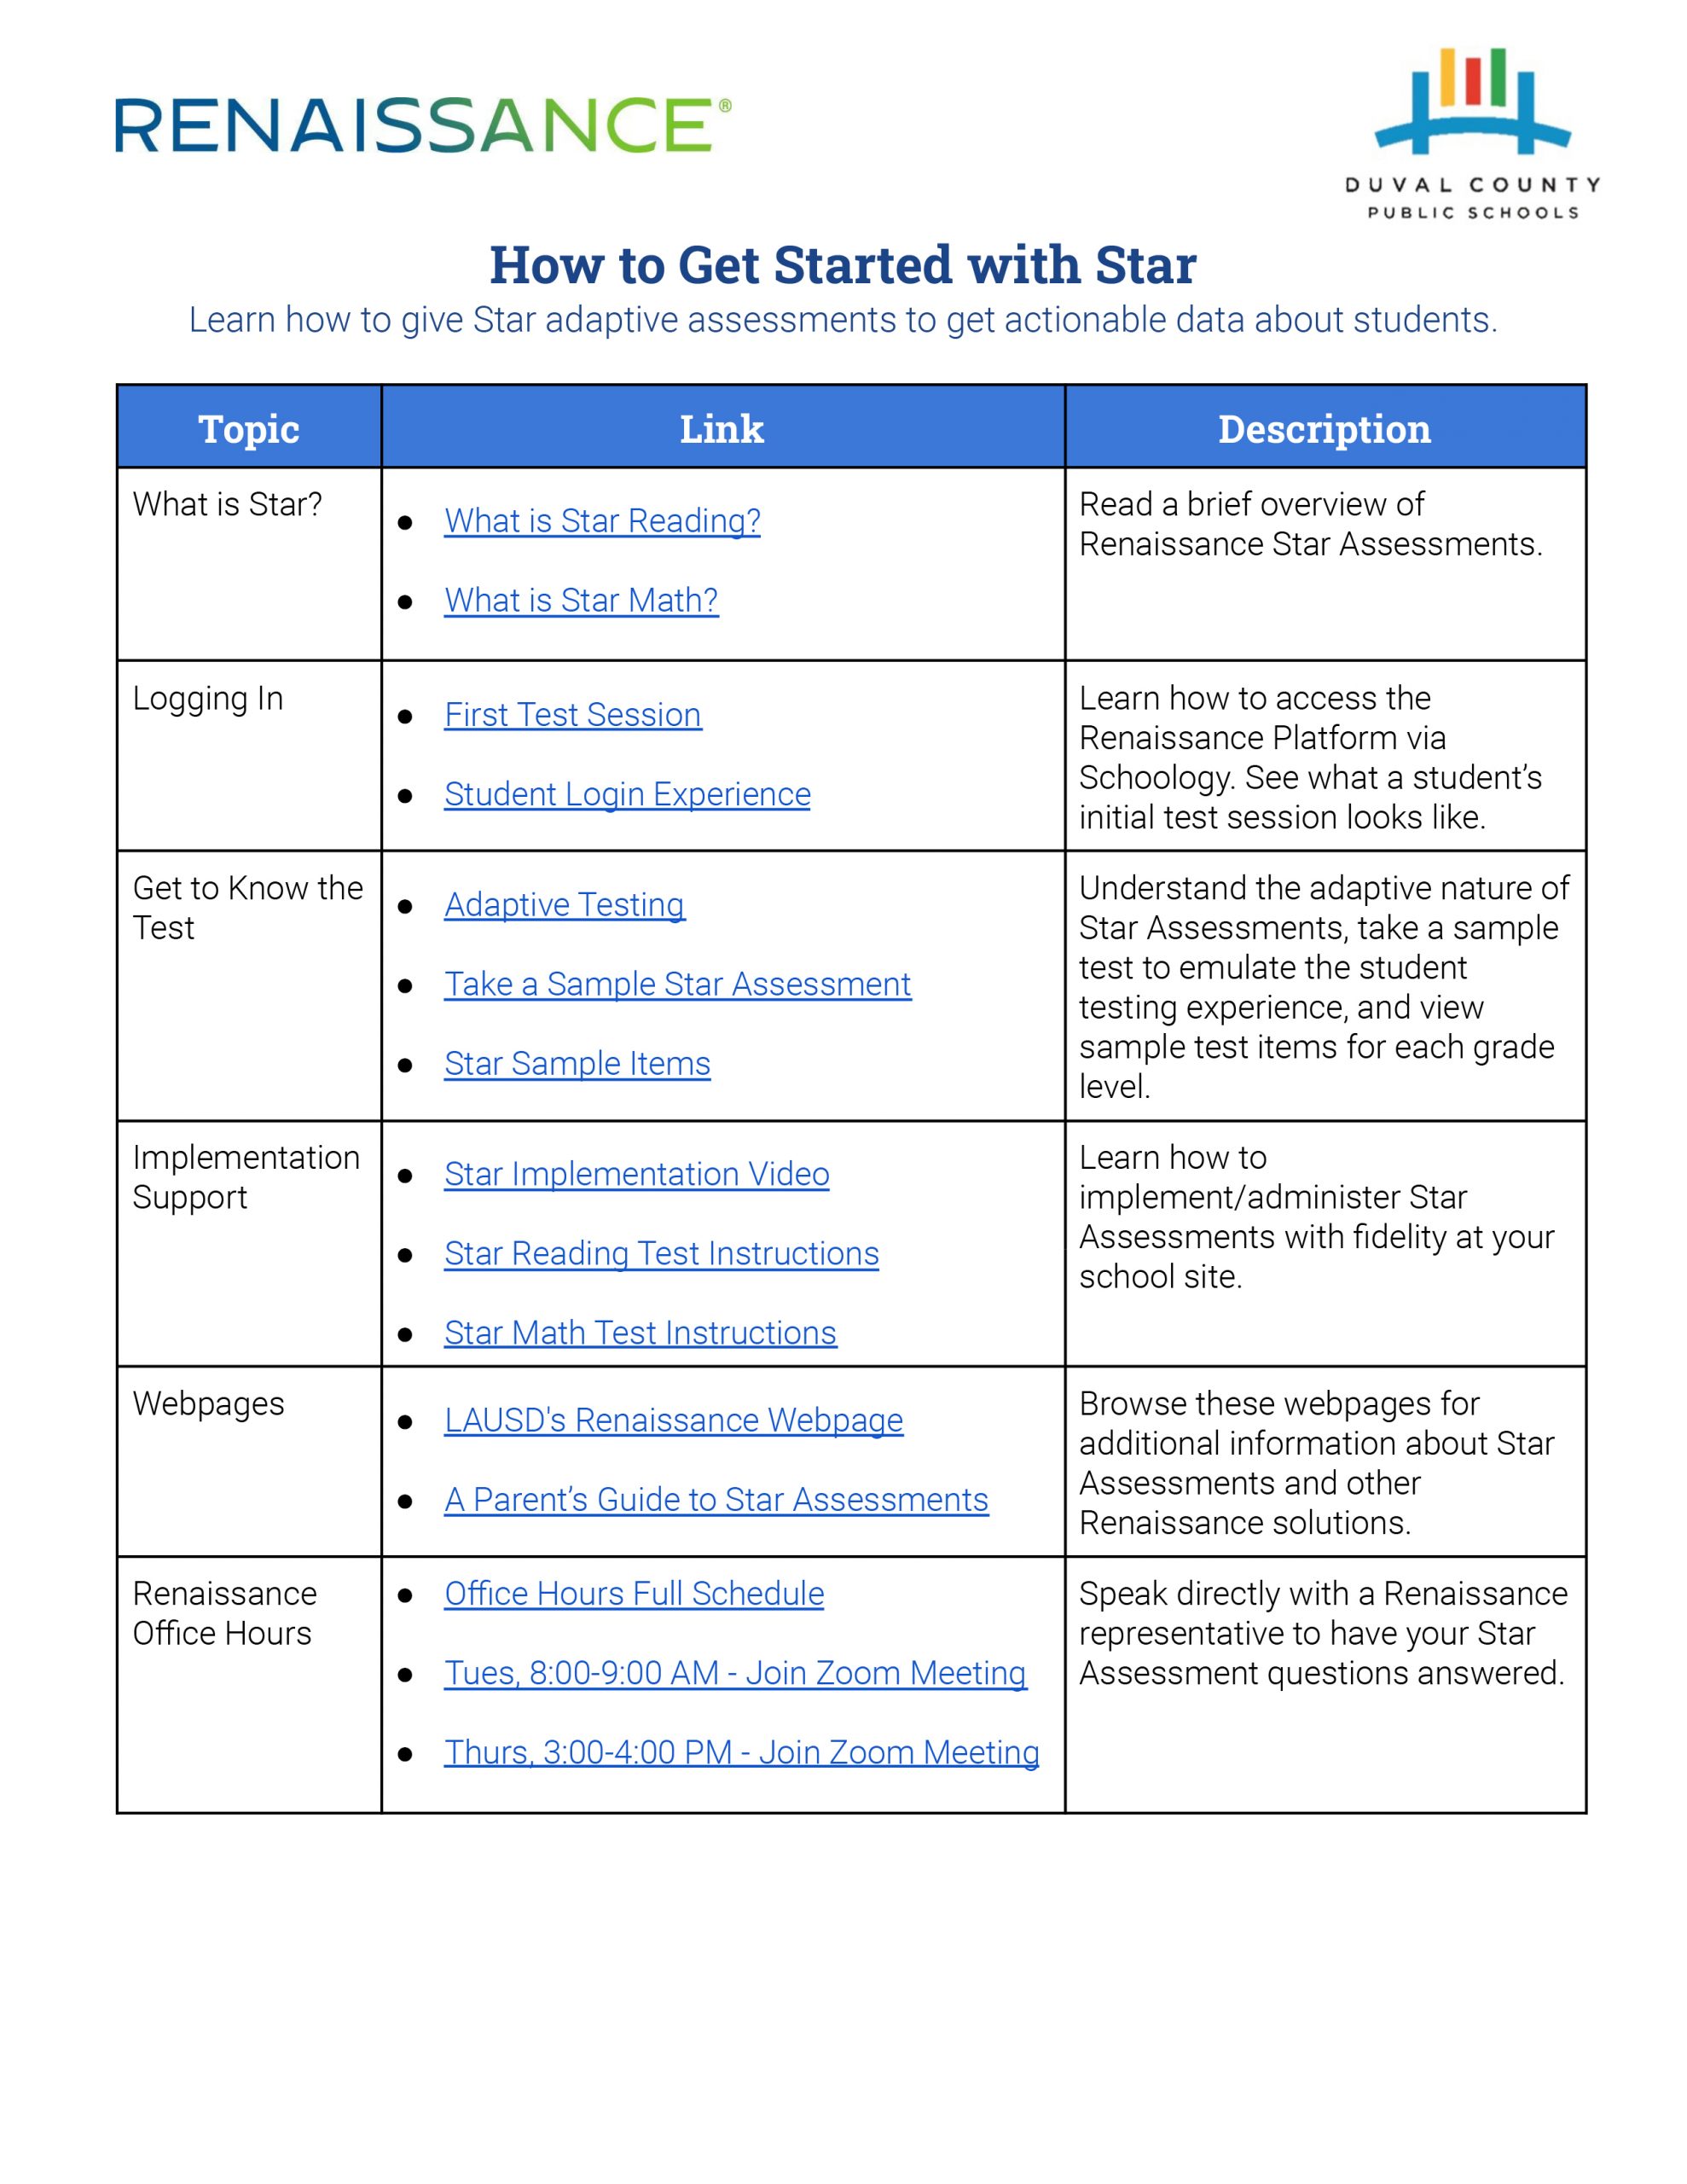 How to get Started with Star